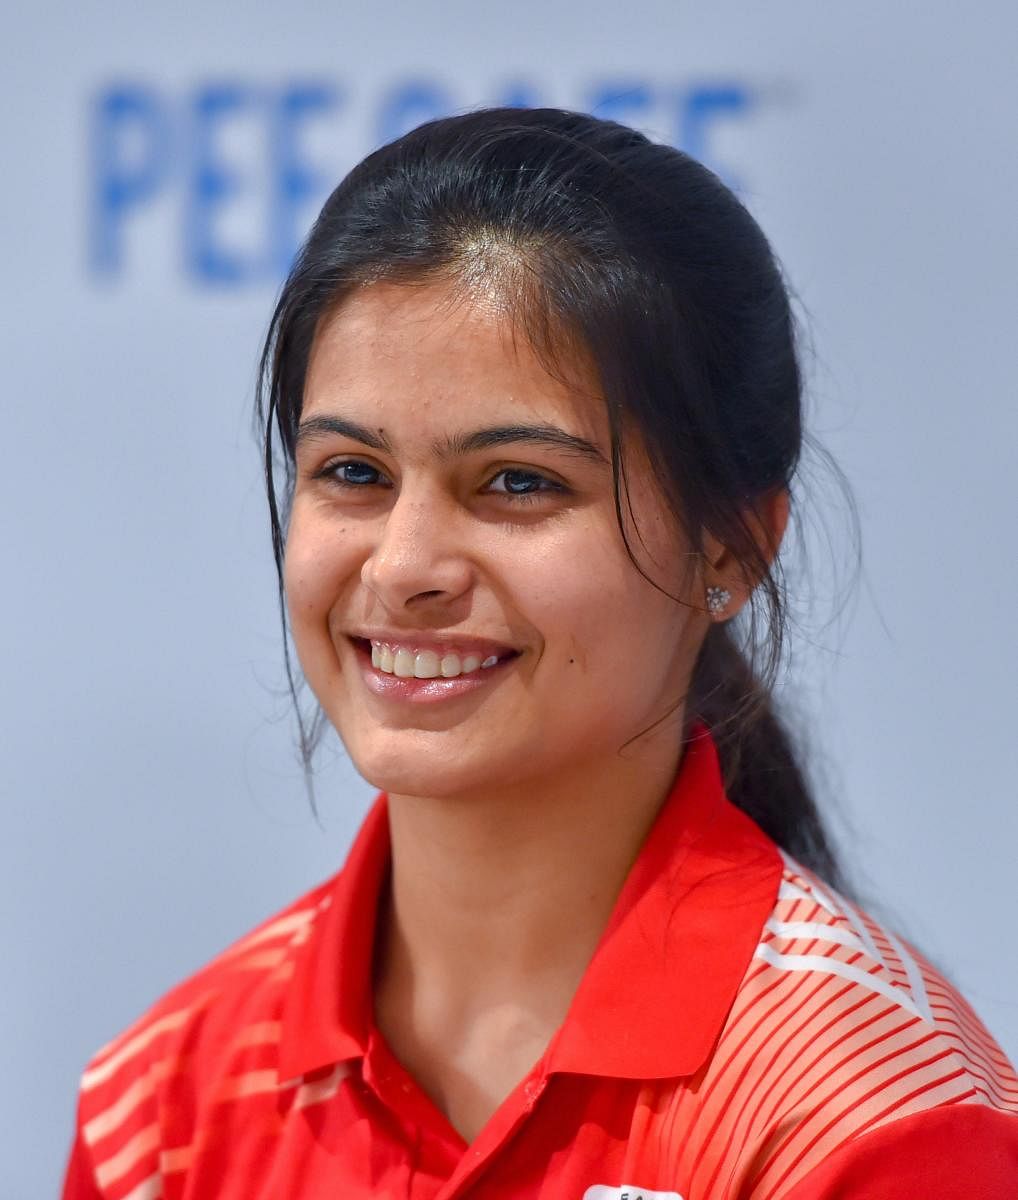 India's Manu Bhaker will look for another good show at the ISSF World Cup in Munich